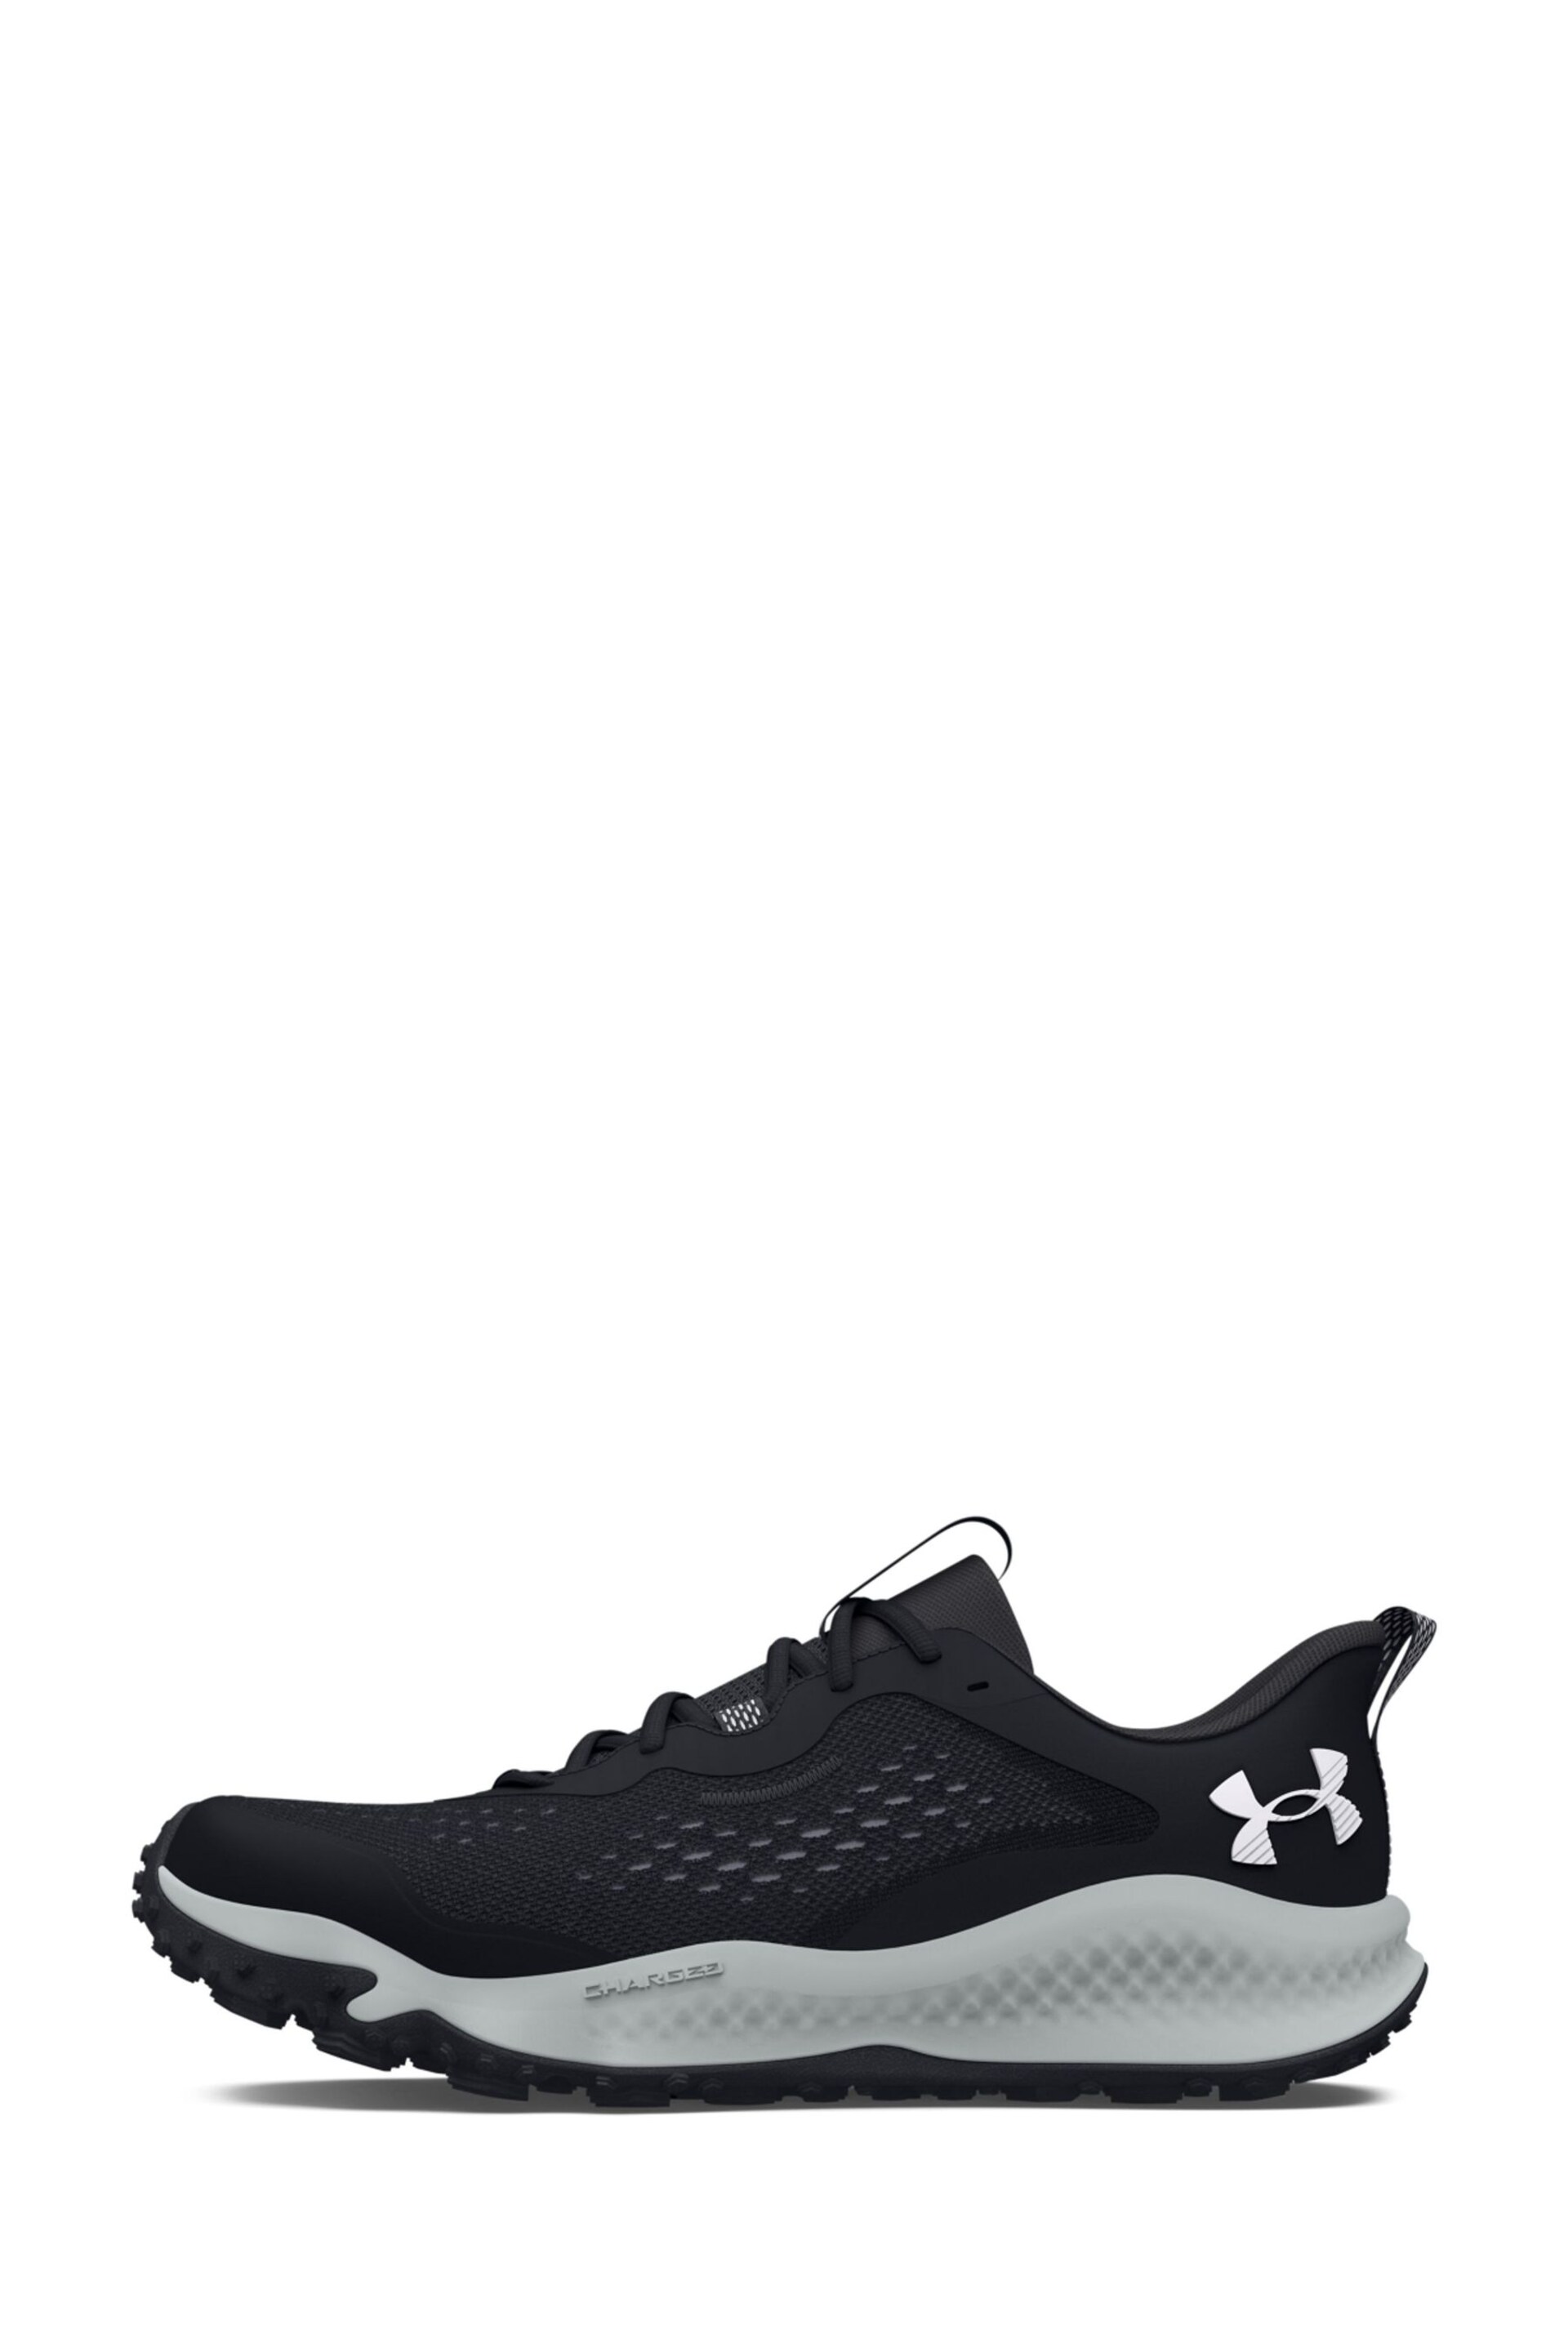 Under Armour Charged Maven Black Trainers - Image 5 of 6